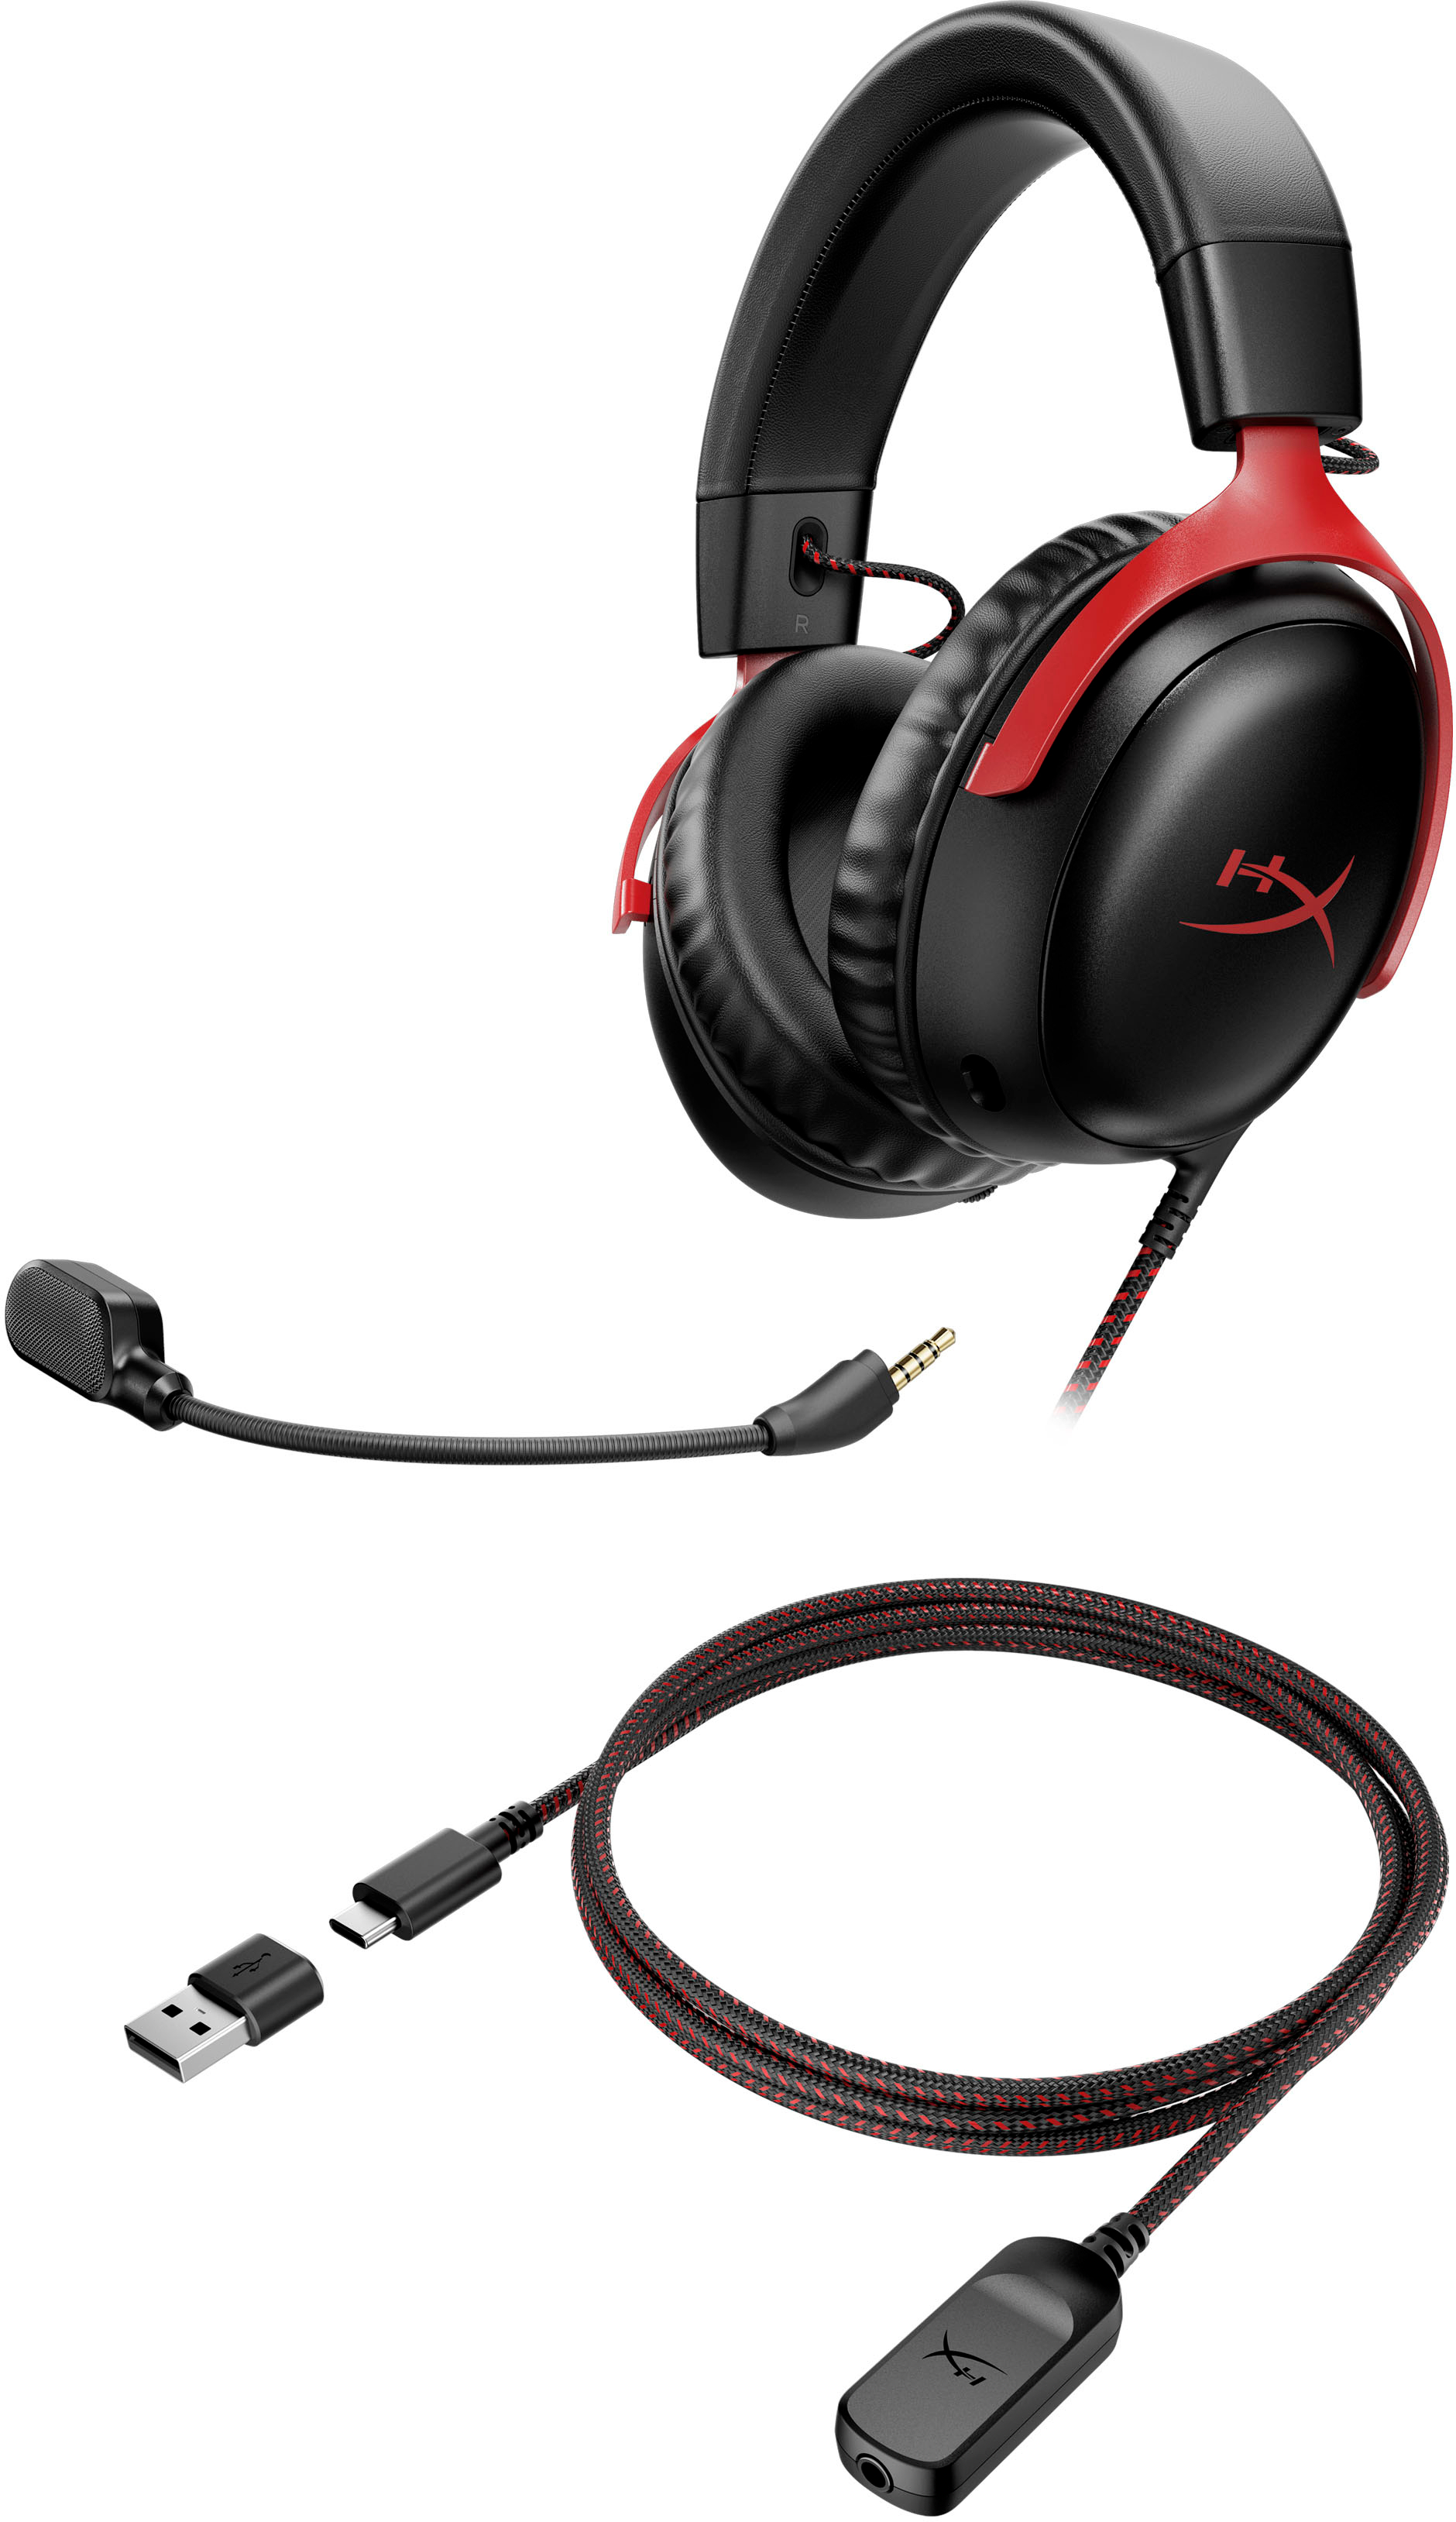 Black/Red PS4, One, HyperX and PC, 727A9AA PS5, for Series Xbox Mobile Cloud Best Headset X|S, III Nintendo Buy Gaming Switch, Wired Xbox -